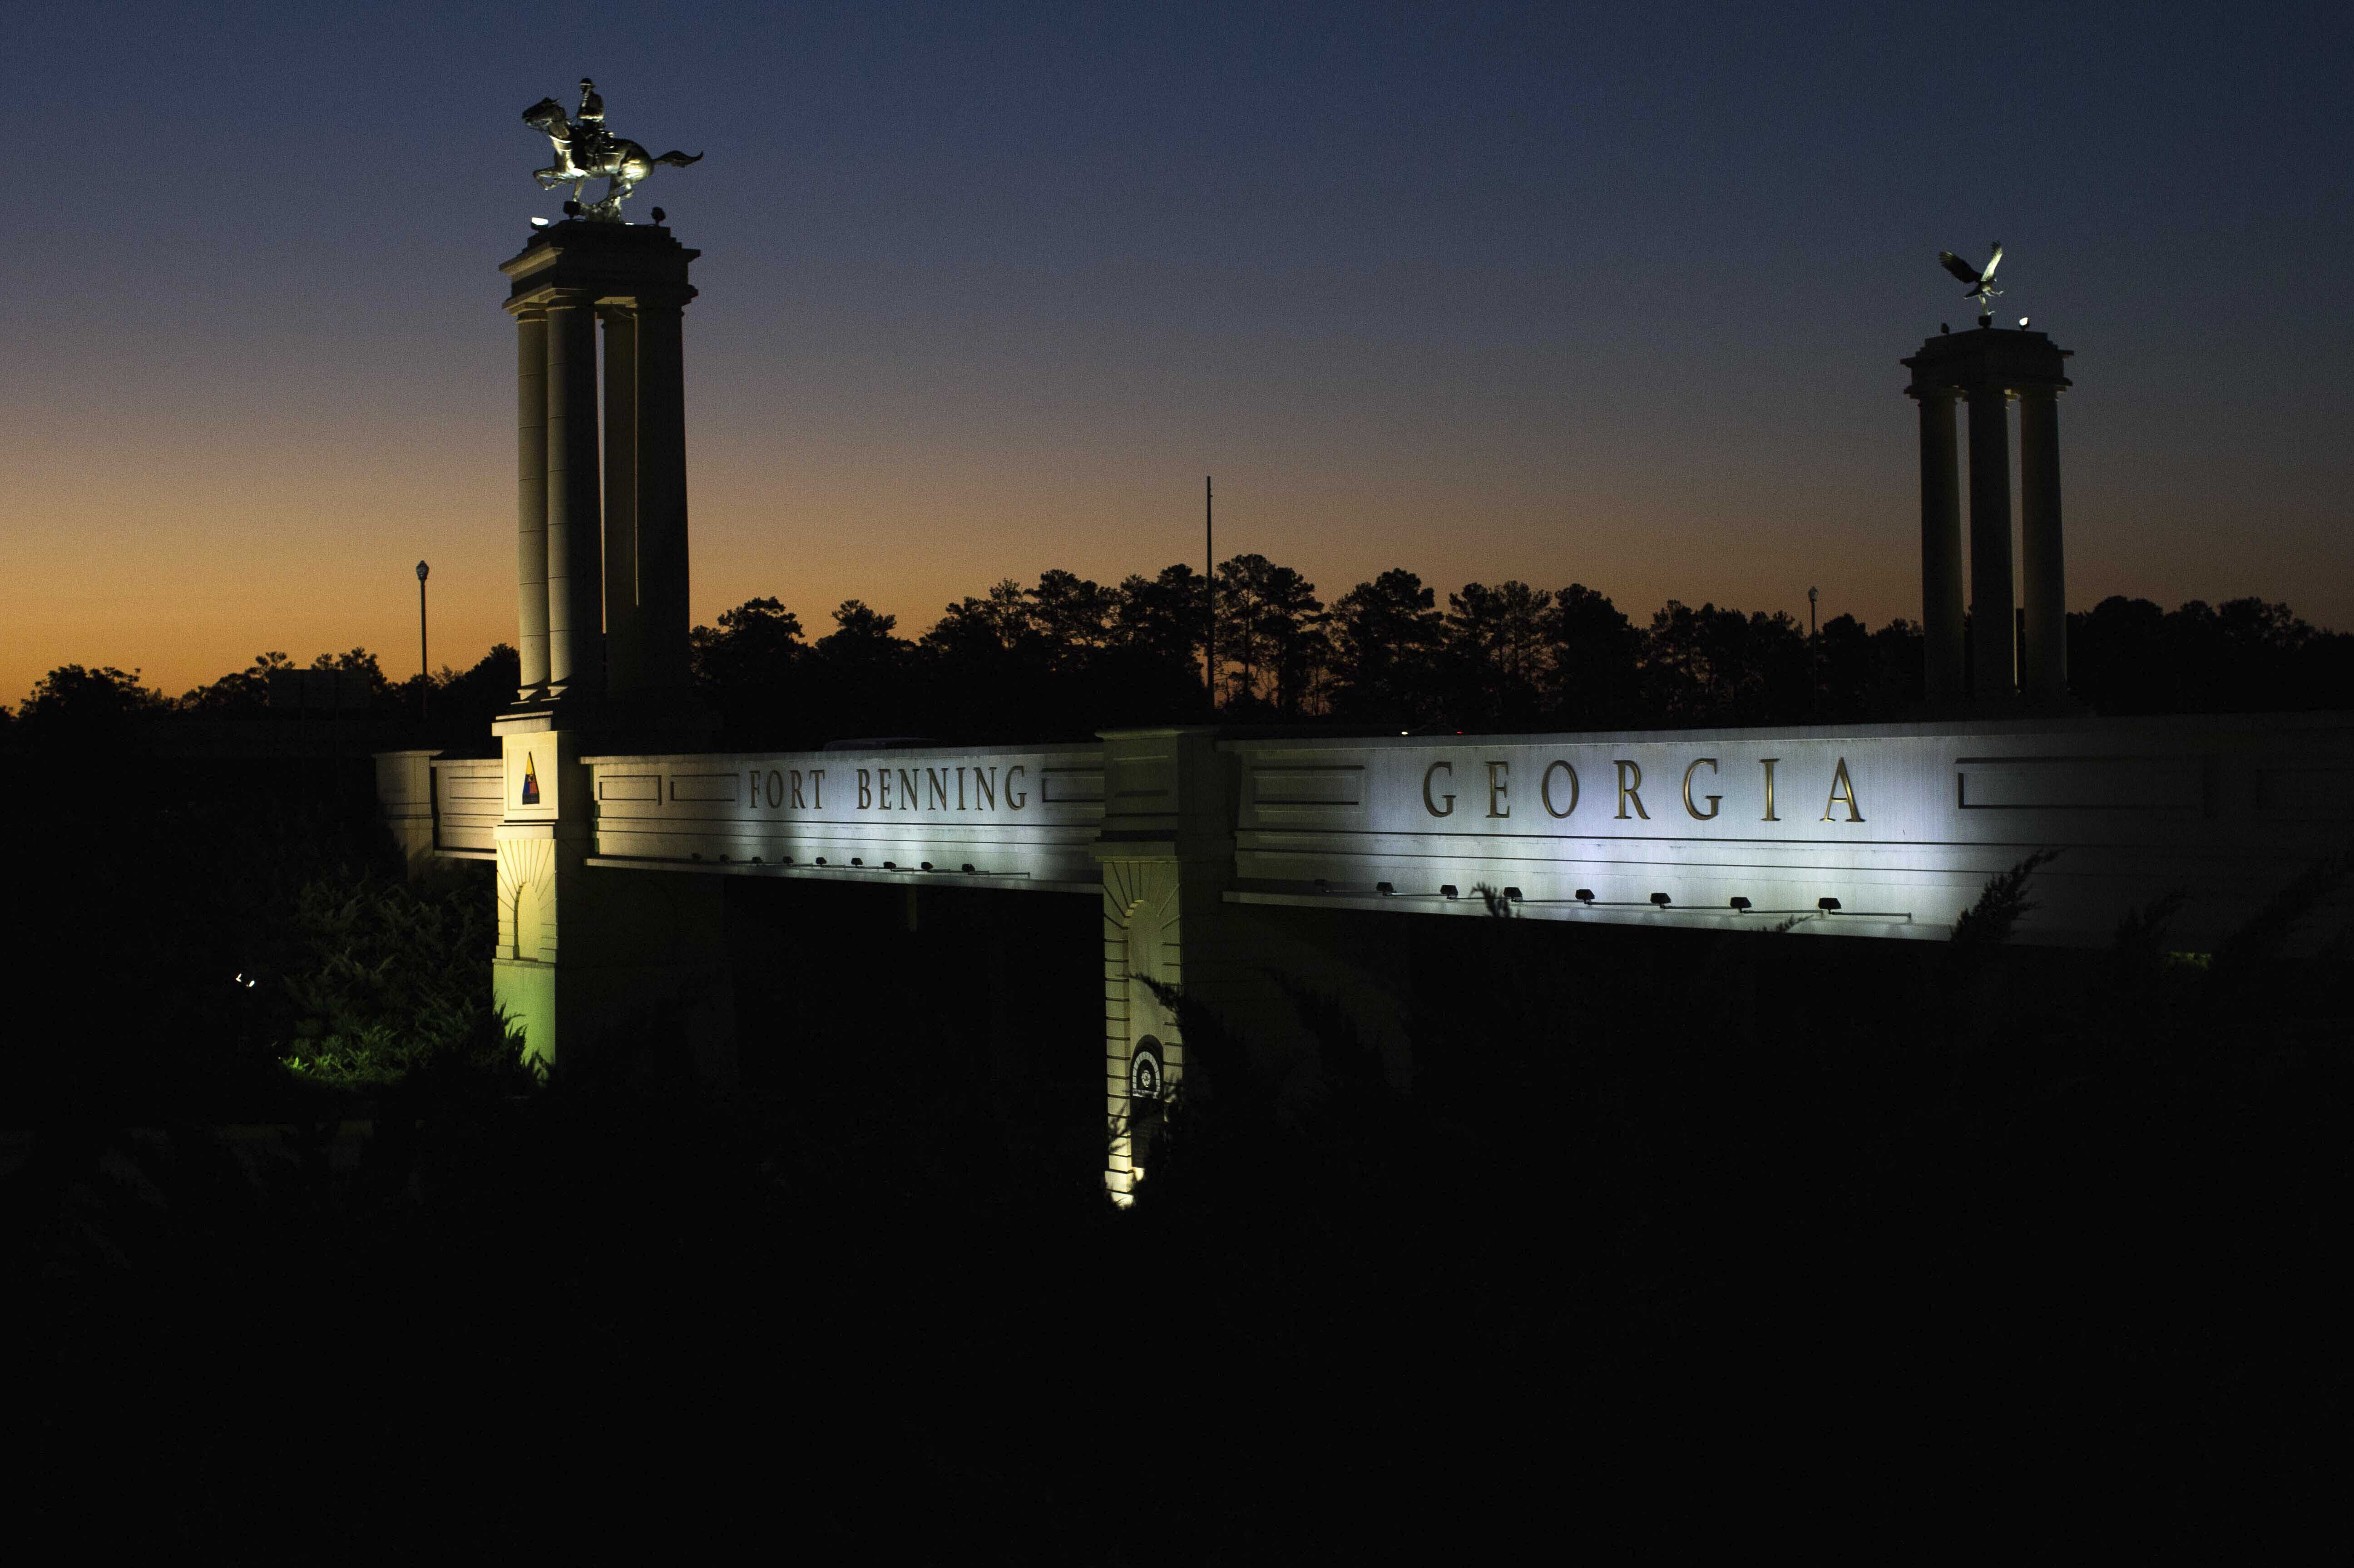 A bridge marks the entrance to the U.S. Army's Fort Benning as the sun rises in Columbus, Ga. Fort Benning is named after Confederate officers.